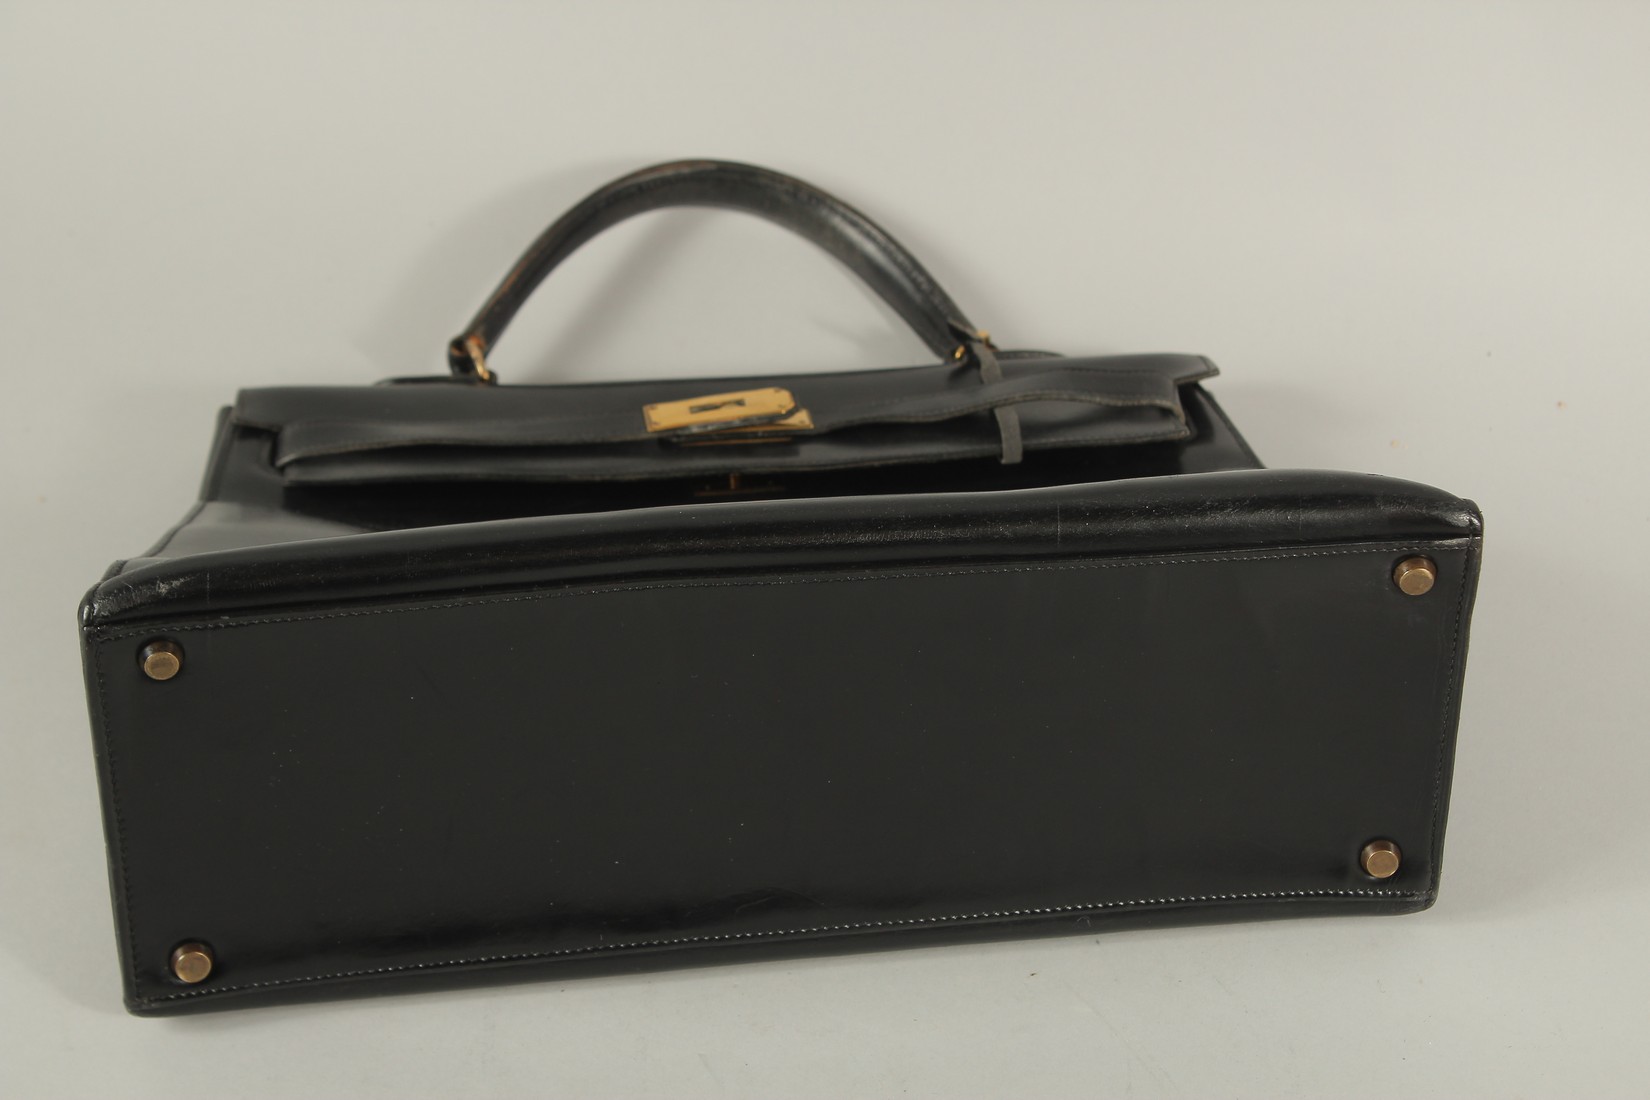 A VERY GOOD VINTAGE HERMES BLACK LEATHER BAG, 1963. 36cms long x 26cms deep x 13cms wide, with a - Image 7 of 7